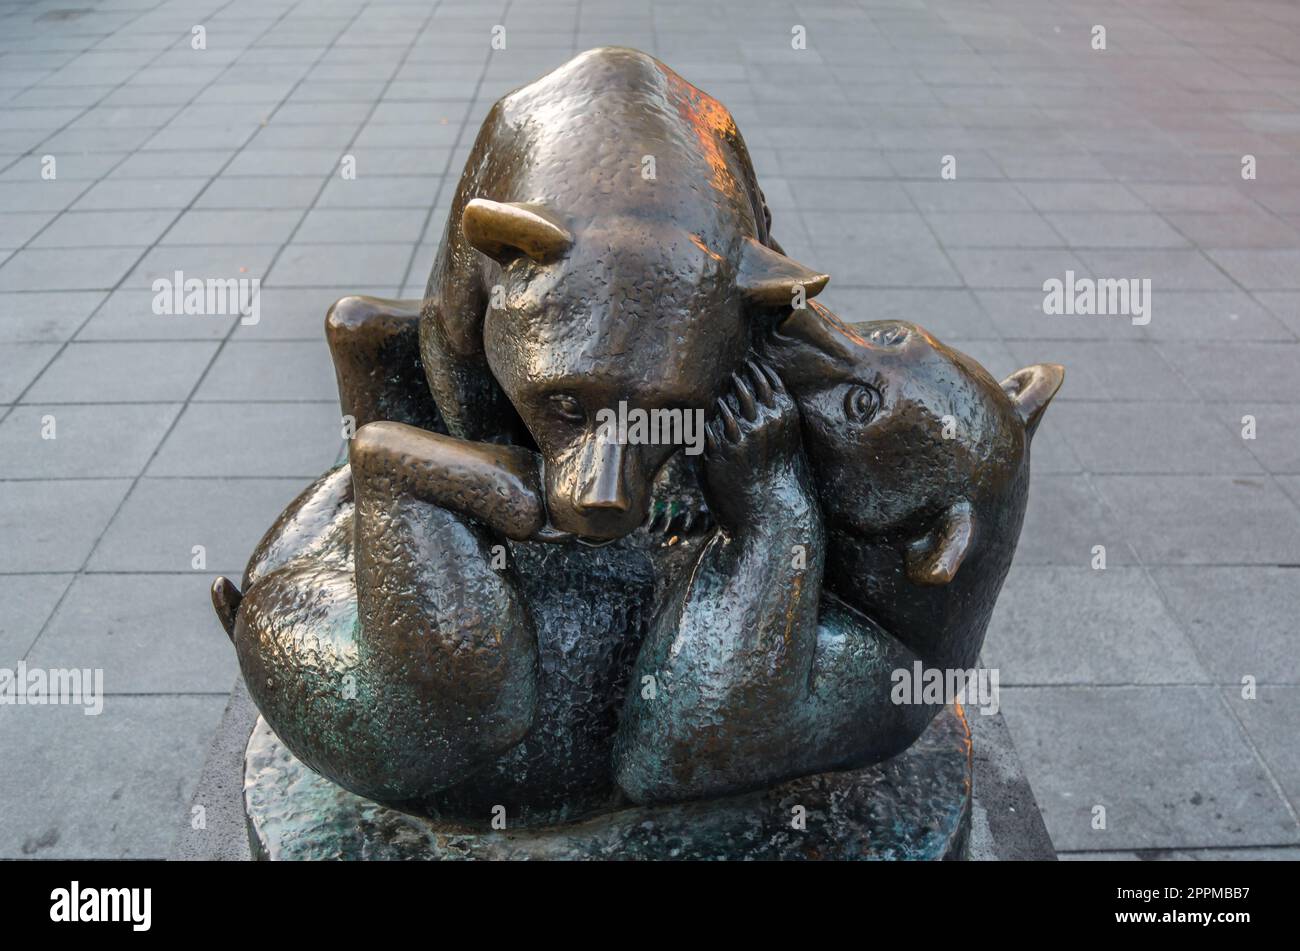 ROTTERDAM, THE NETHERLANDS - AUGUST 26, 2013: Bronze statue entitled 'Playing Bears' located on the Lijnbaan, a shopping street in the center of Rotterdam, the Netherlands. The sculpture was created in 1956 by Norwegian sculptor Anne Grimdalen Stock Photo